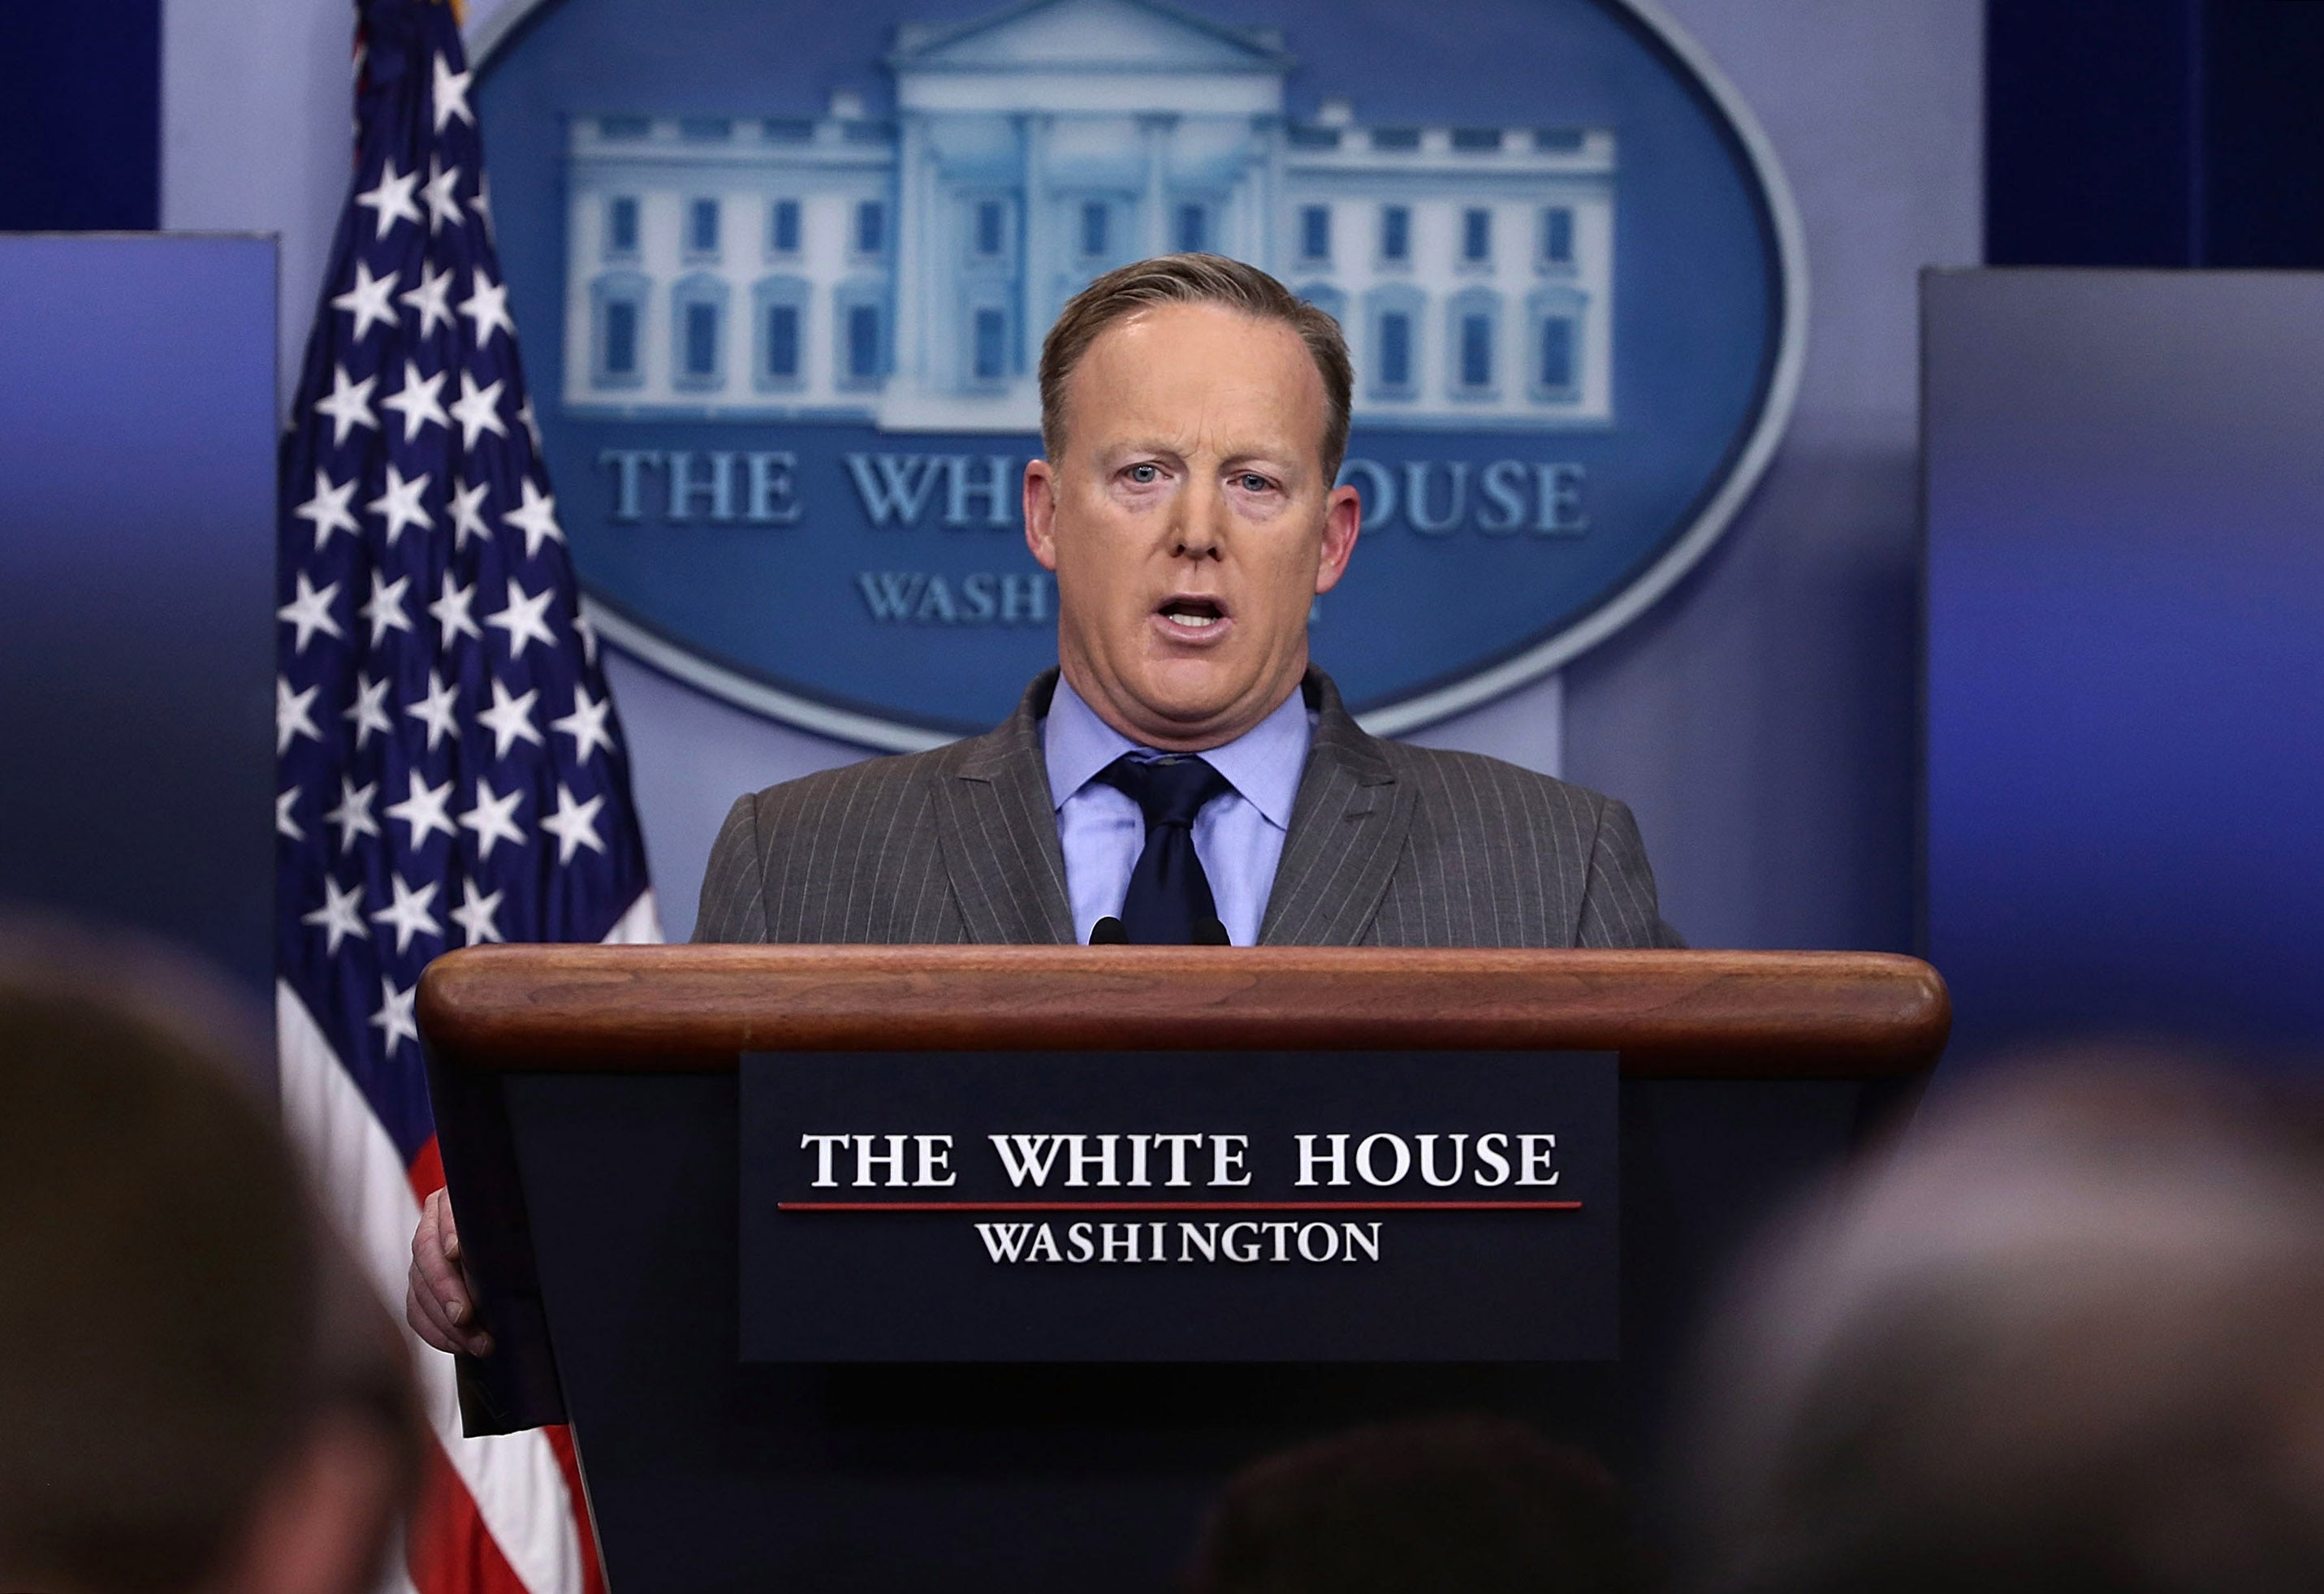 The Irony: Trump’s Press Secretary Takes First Question From Fake News Site During Press Conference
